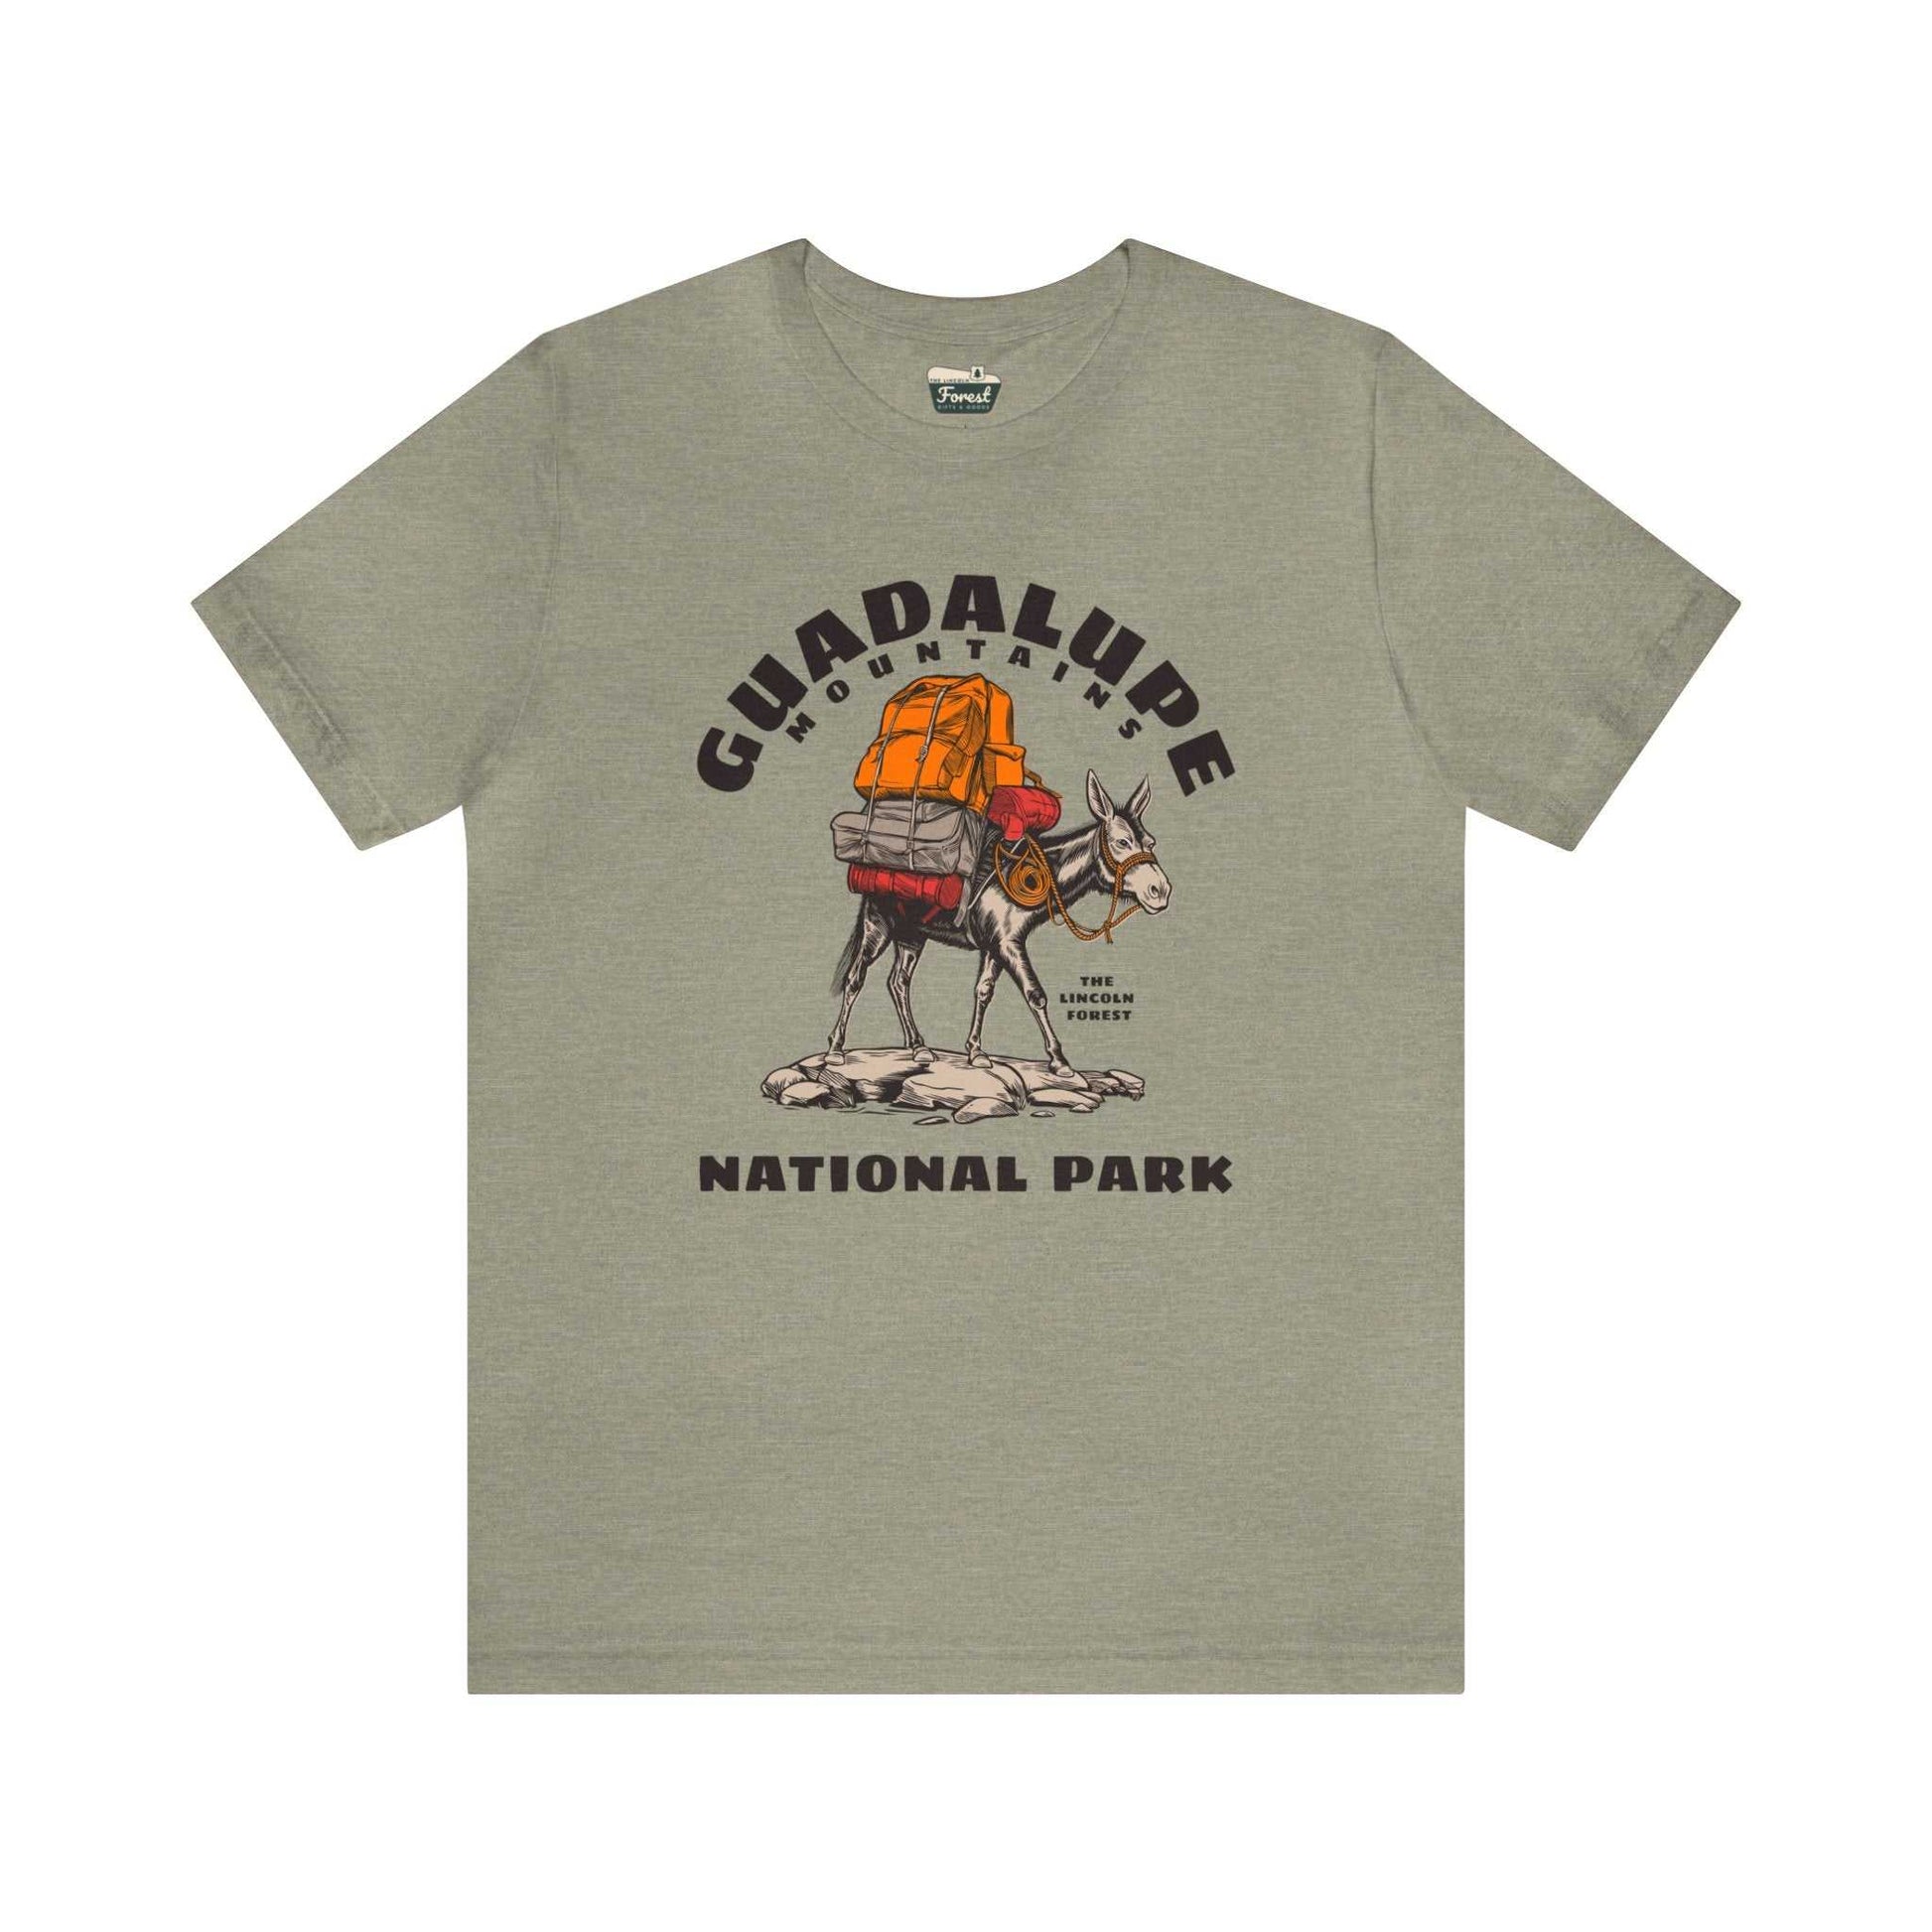 Guadalupe Mountains National Park ShirtDetails:
- 100% jersey cotton - light weight ultra soft fabric - unisex sizing
The Lincoln Forest cares deeply about the planet and creating a business that gives ba